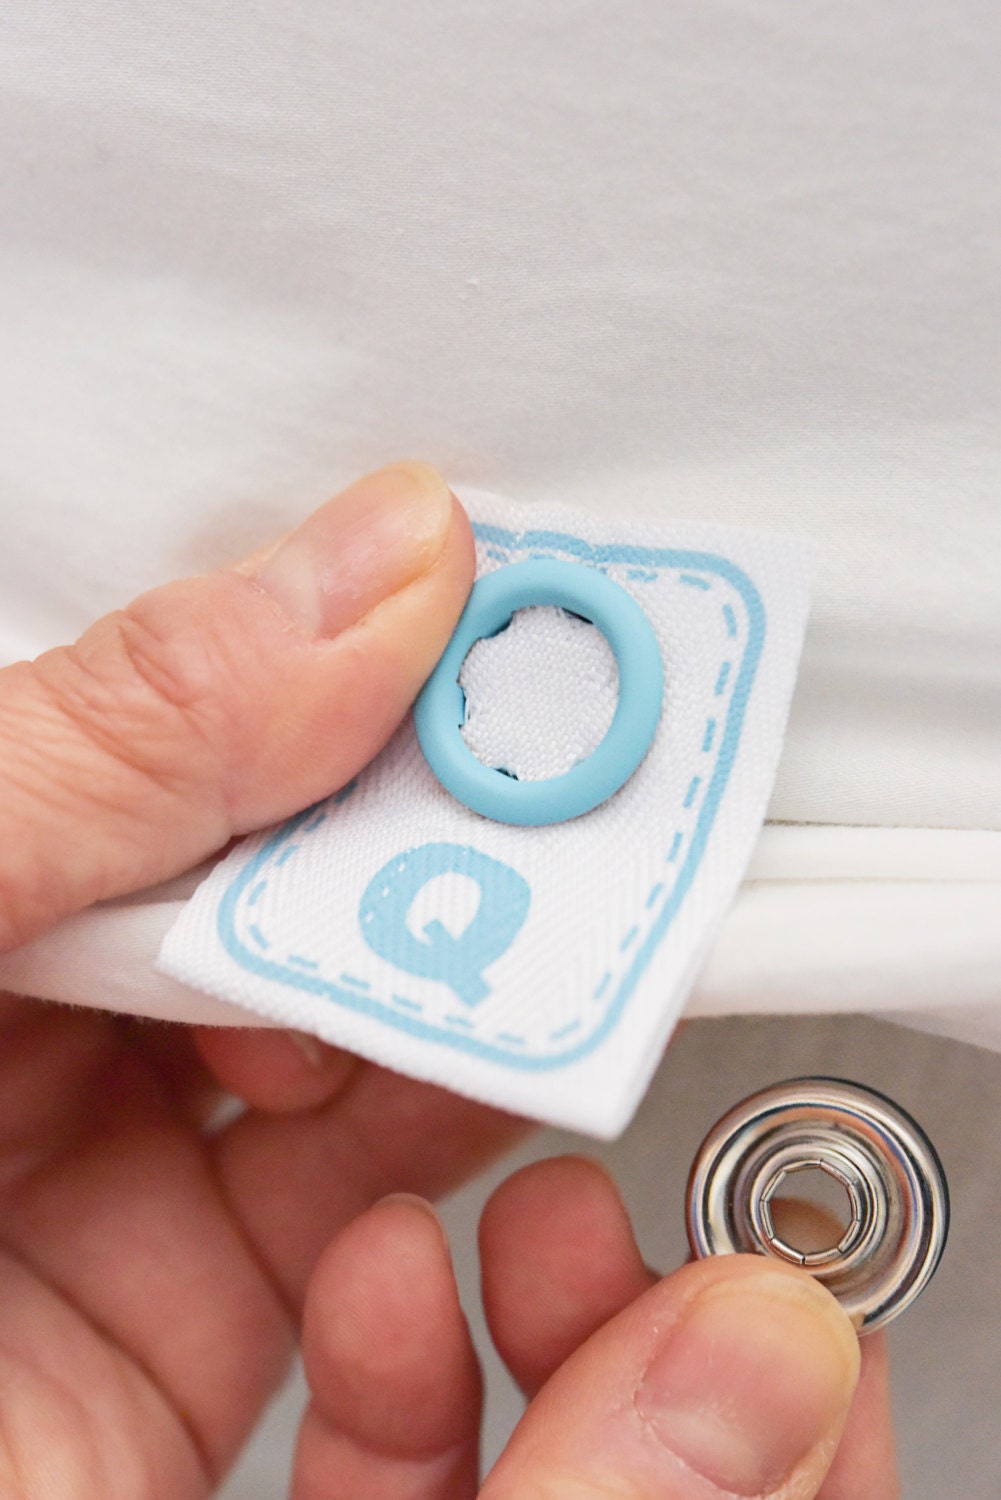 Snap Sheets Can Save You Valuable Bed-Making Time—Here's How They Work